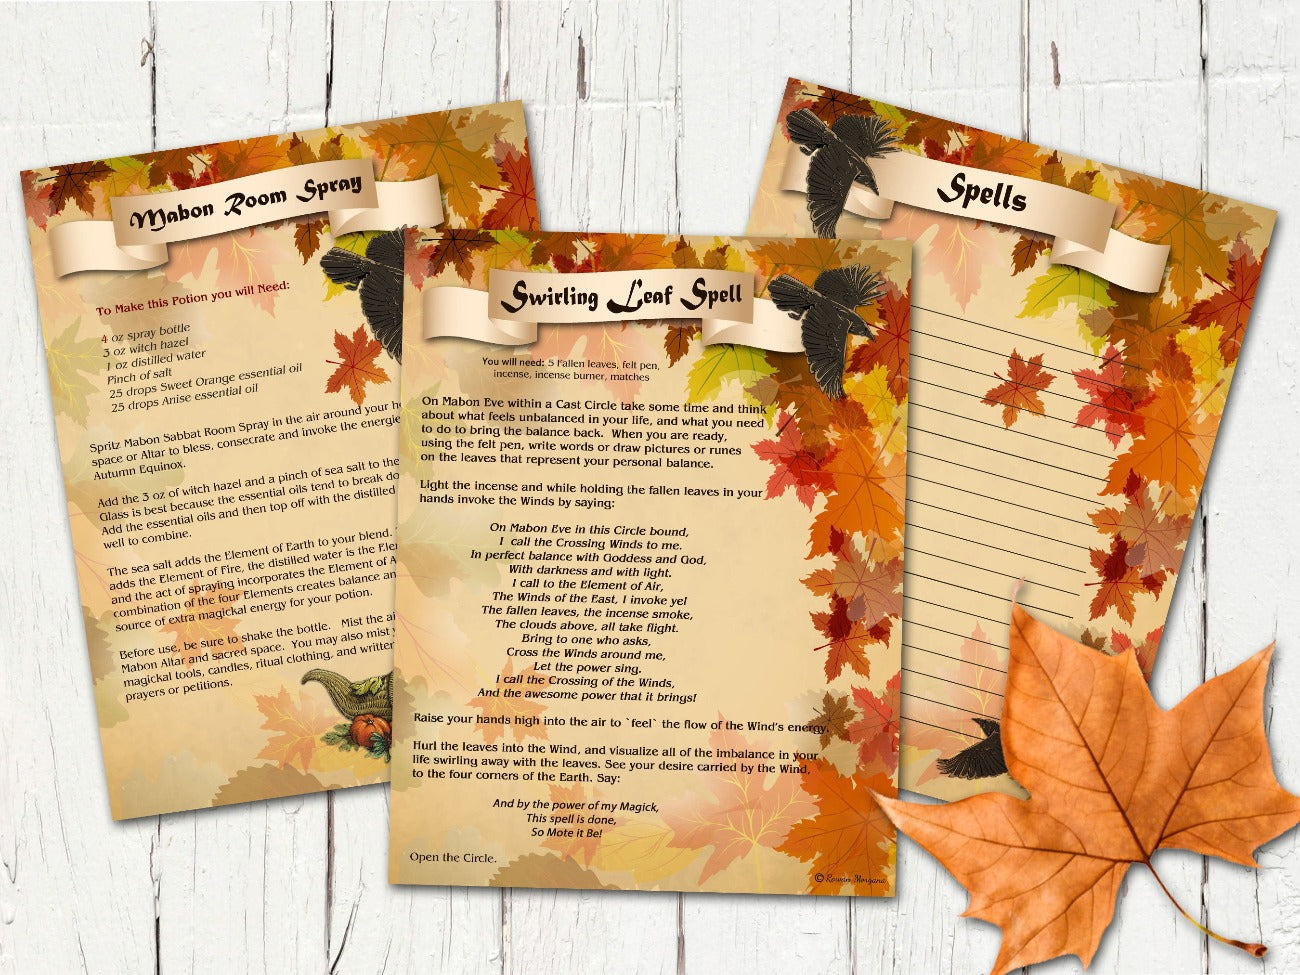 Mabon Room Spray, Mabon Swirling Leaf Spell, and Lined Spells Journal Page - Morgana Magick Spell - Morgana Magick Spell